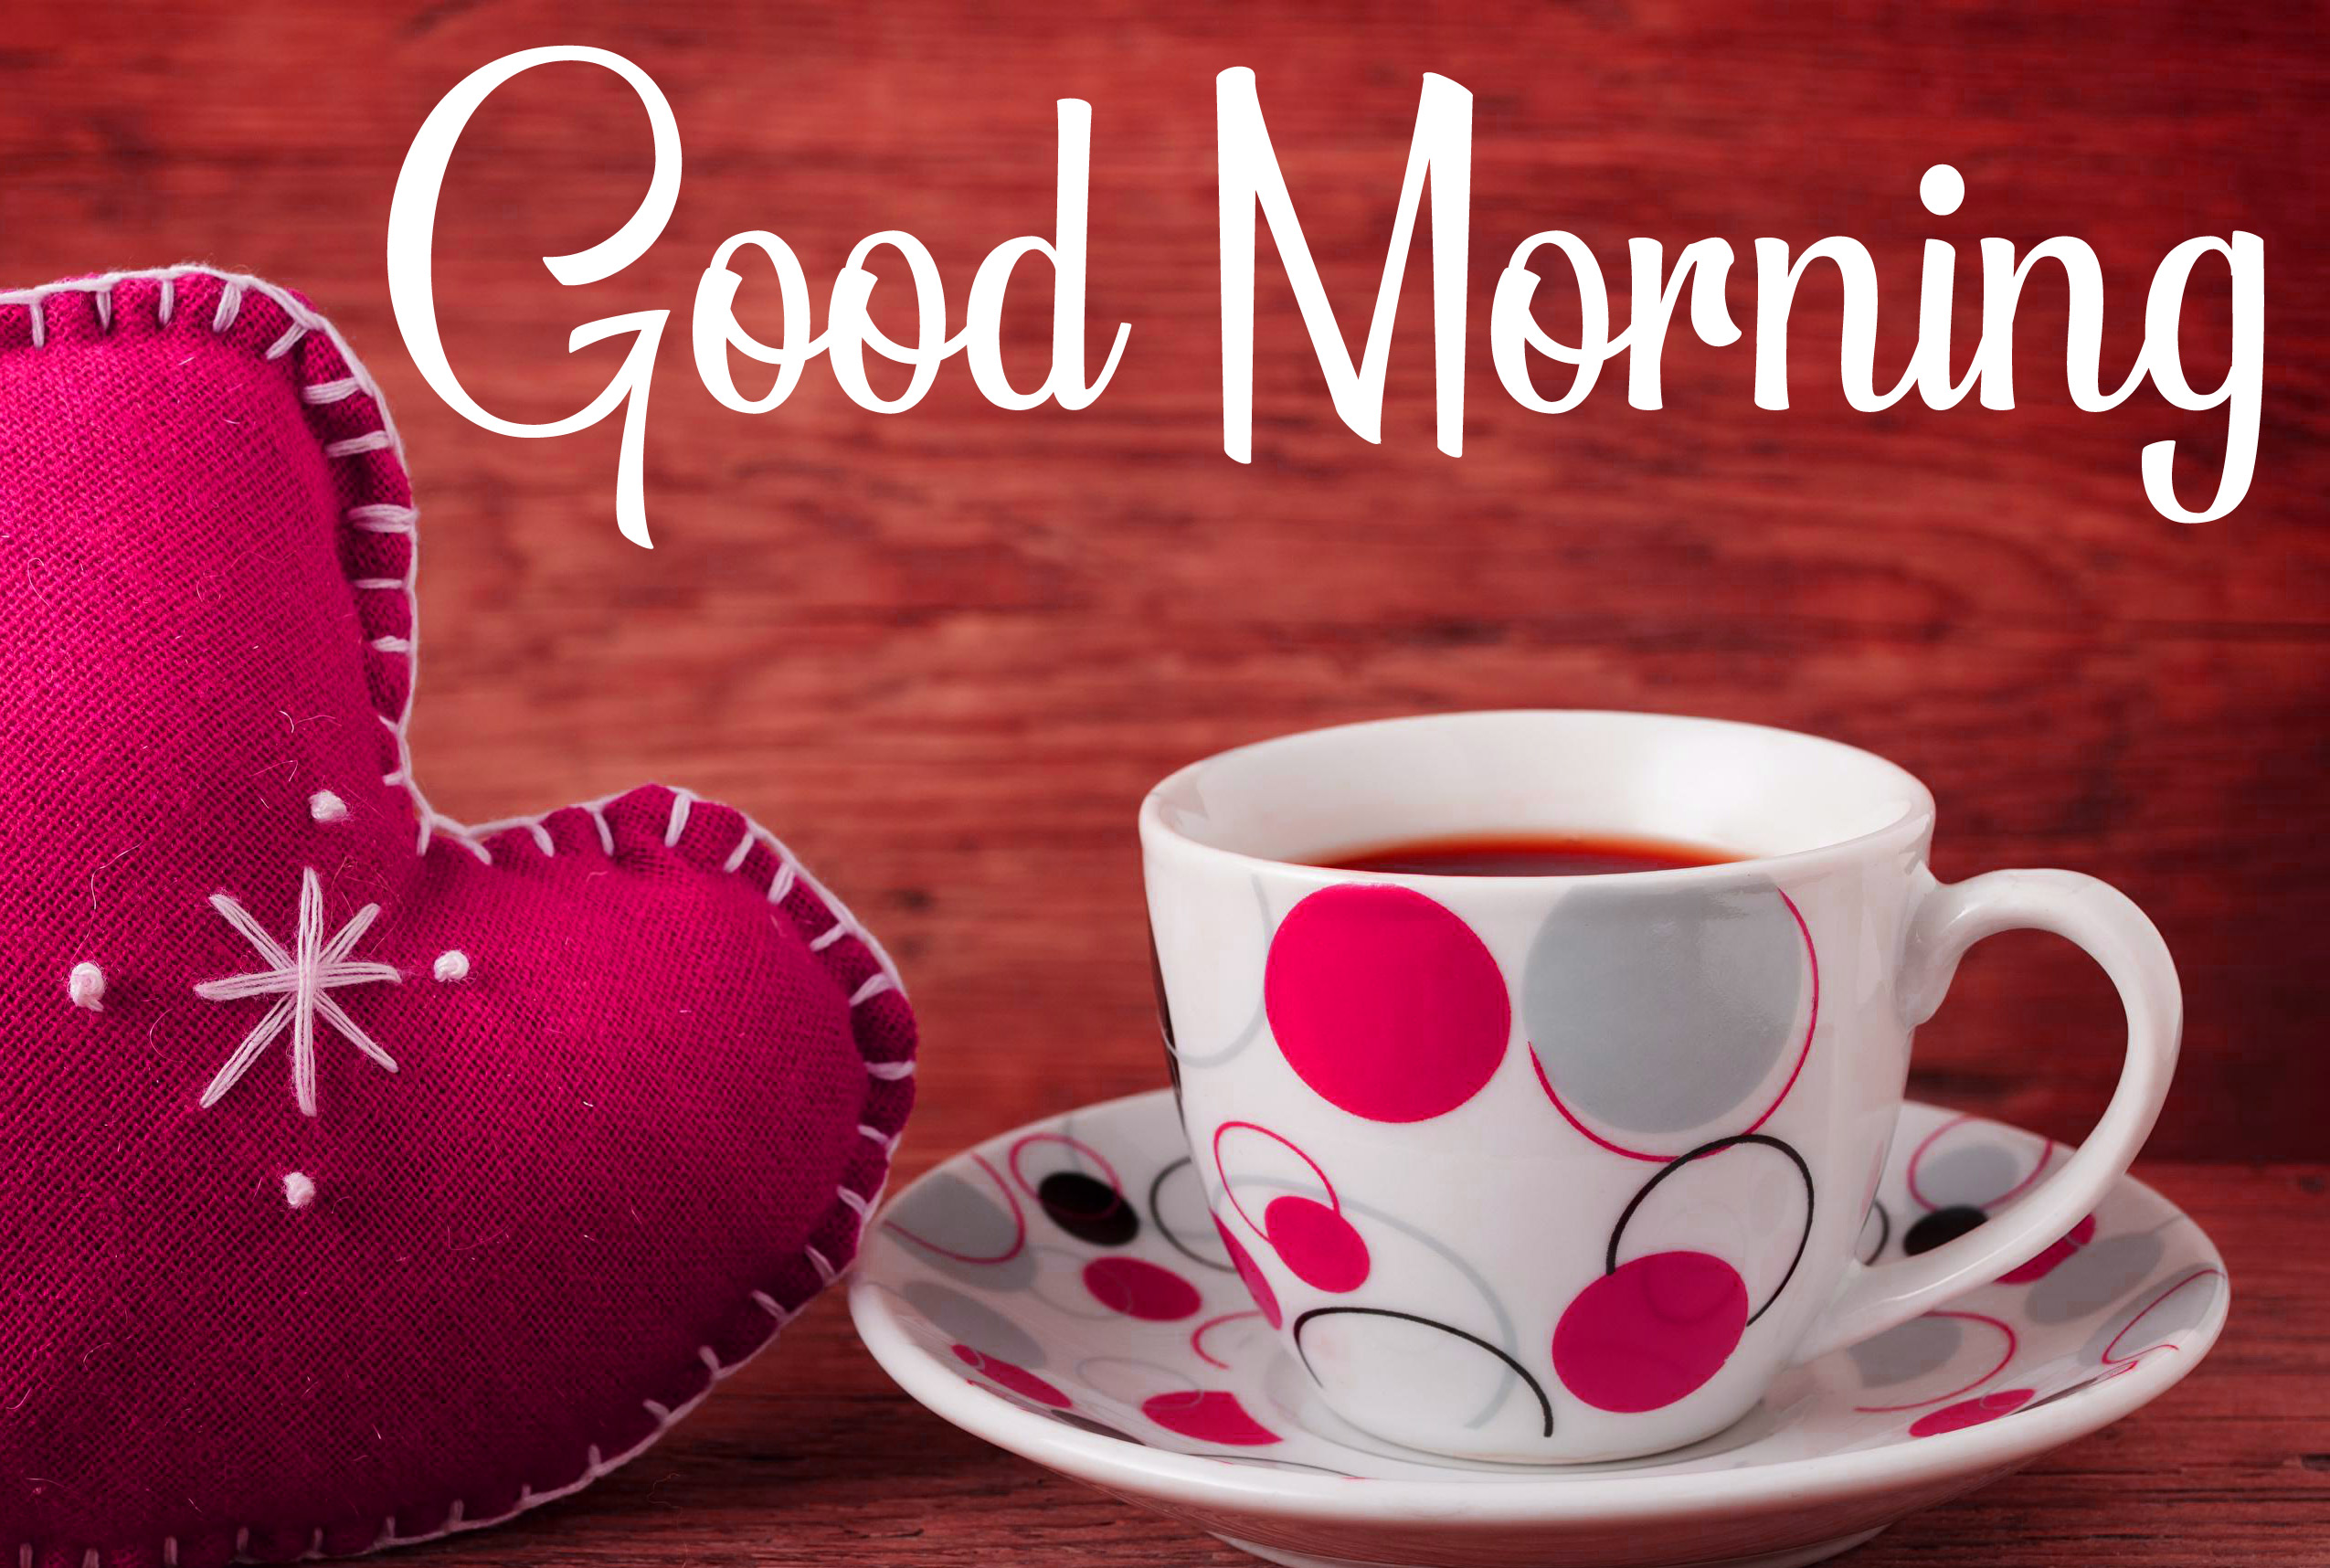 Good Morning Tea Cup Pictures Free Download 